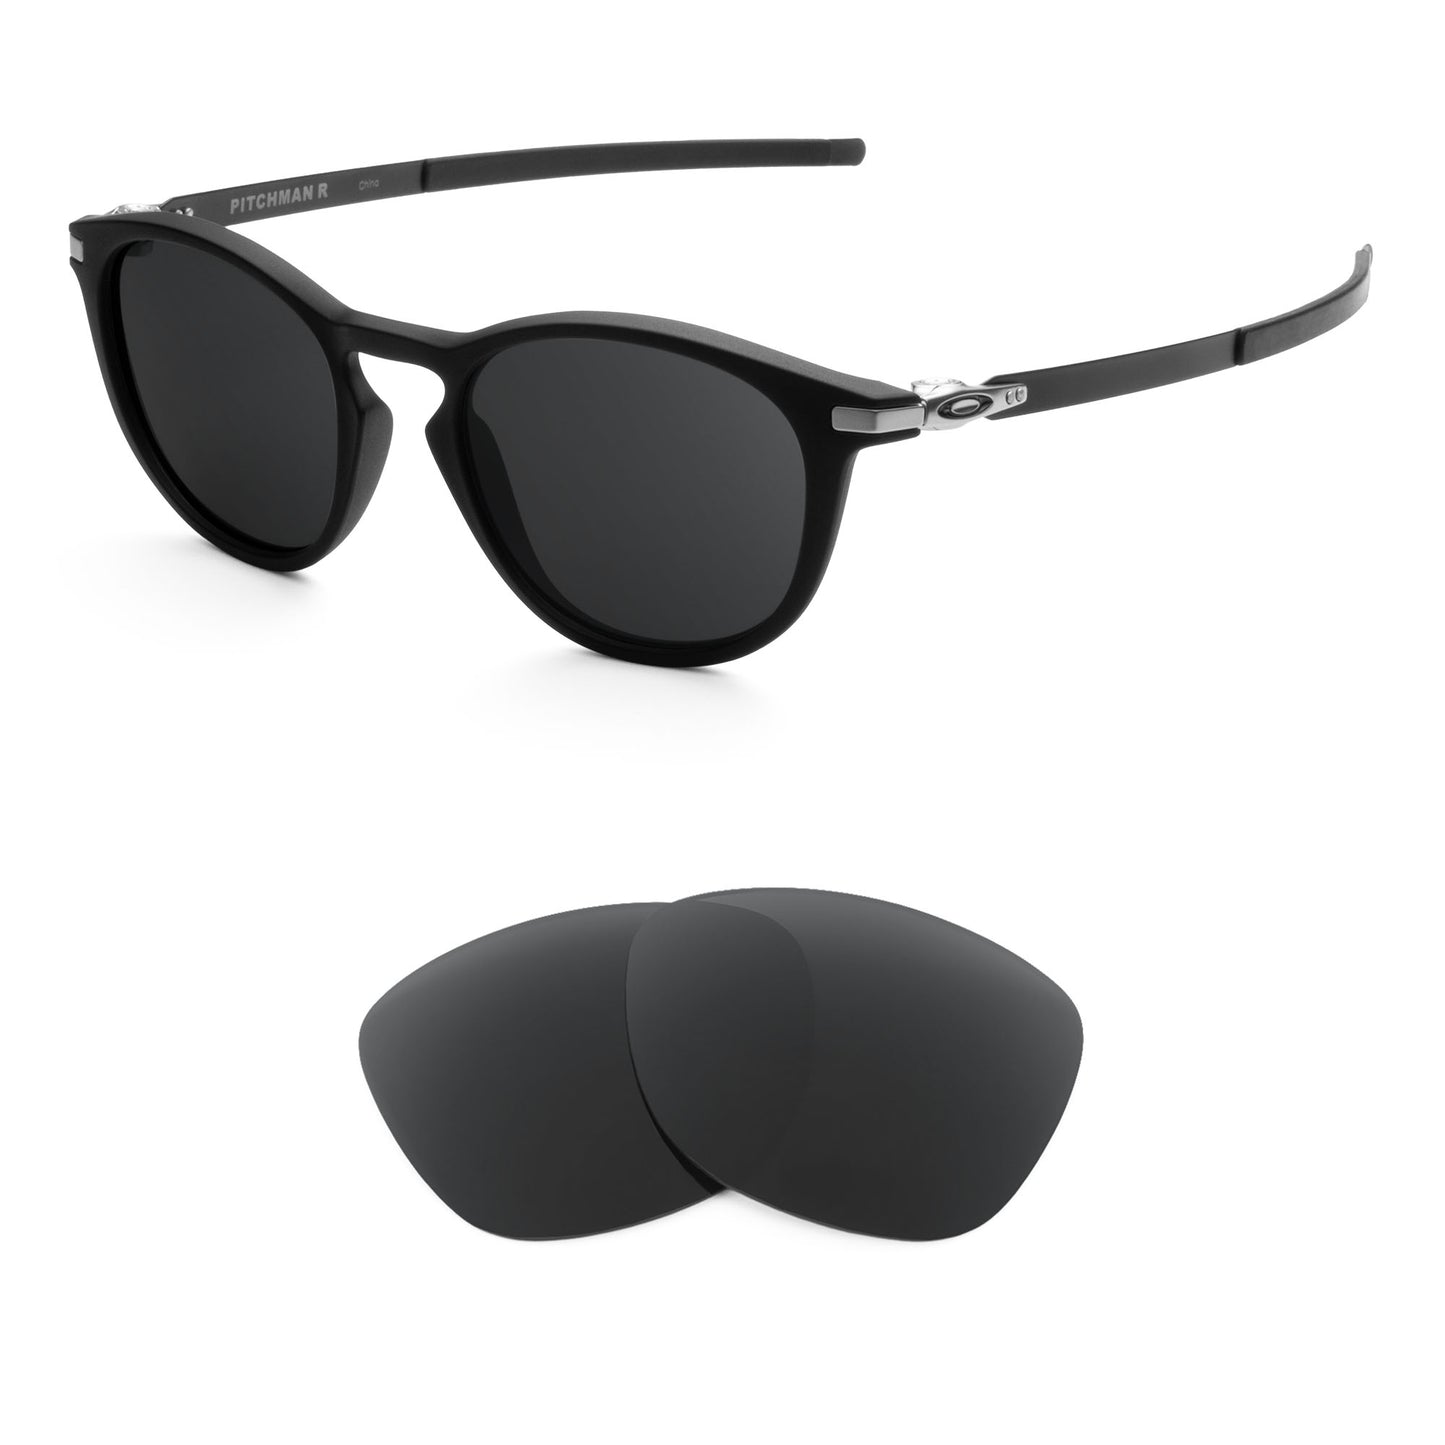 Oakley Pitchman R sunglasses with replacement lenses